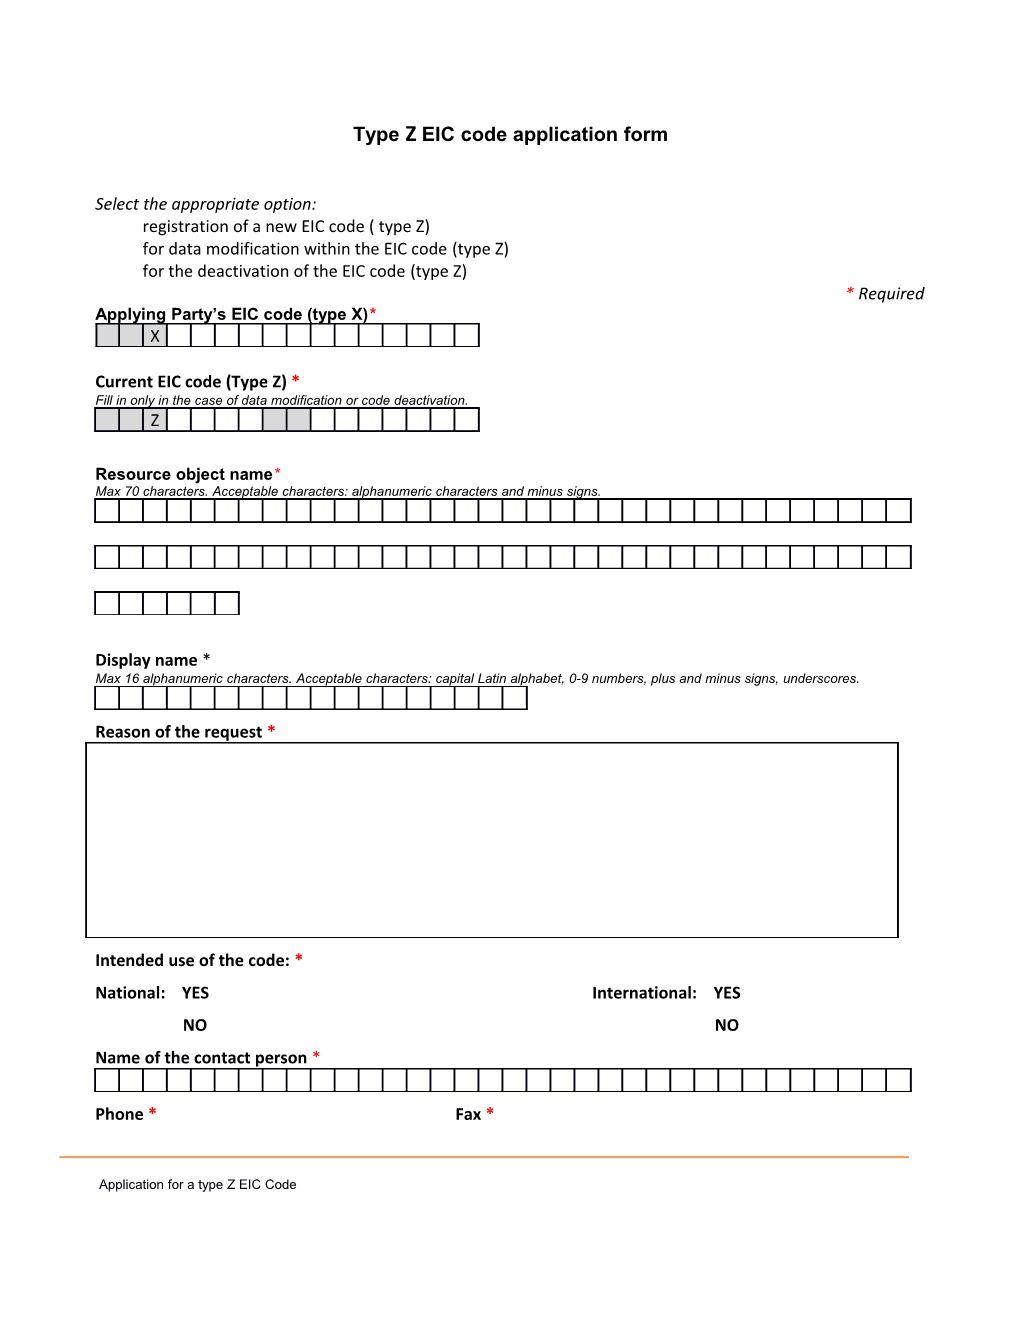 Type Z EIC Code Application Form